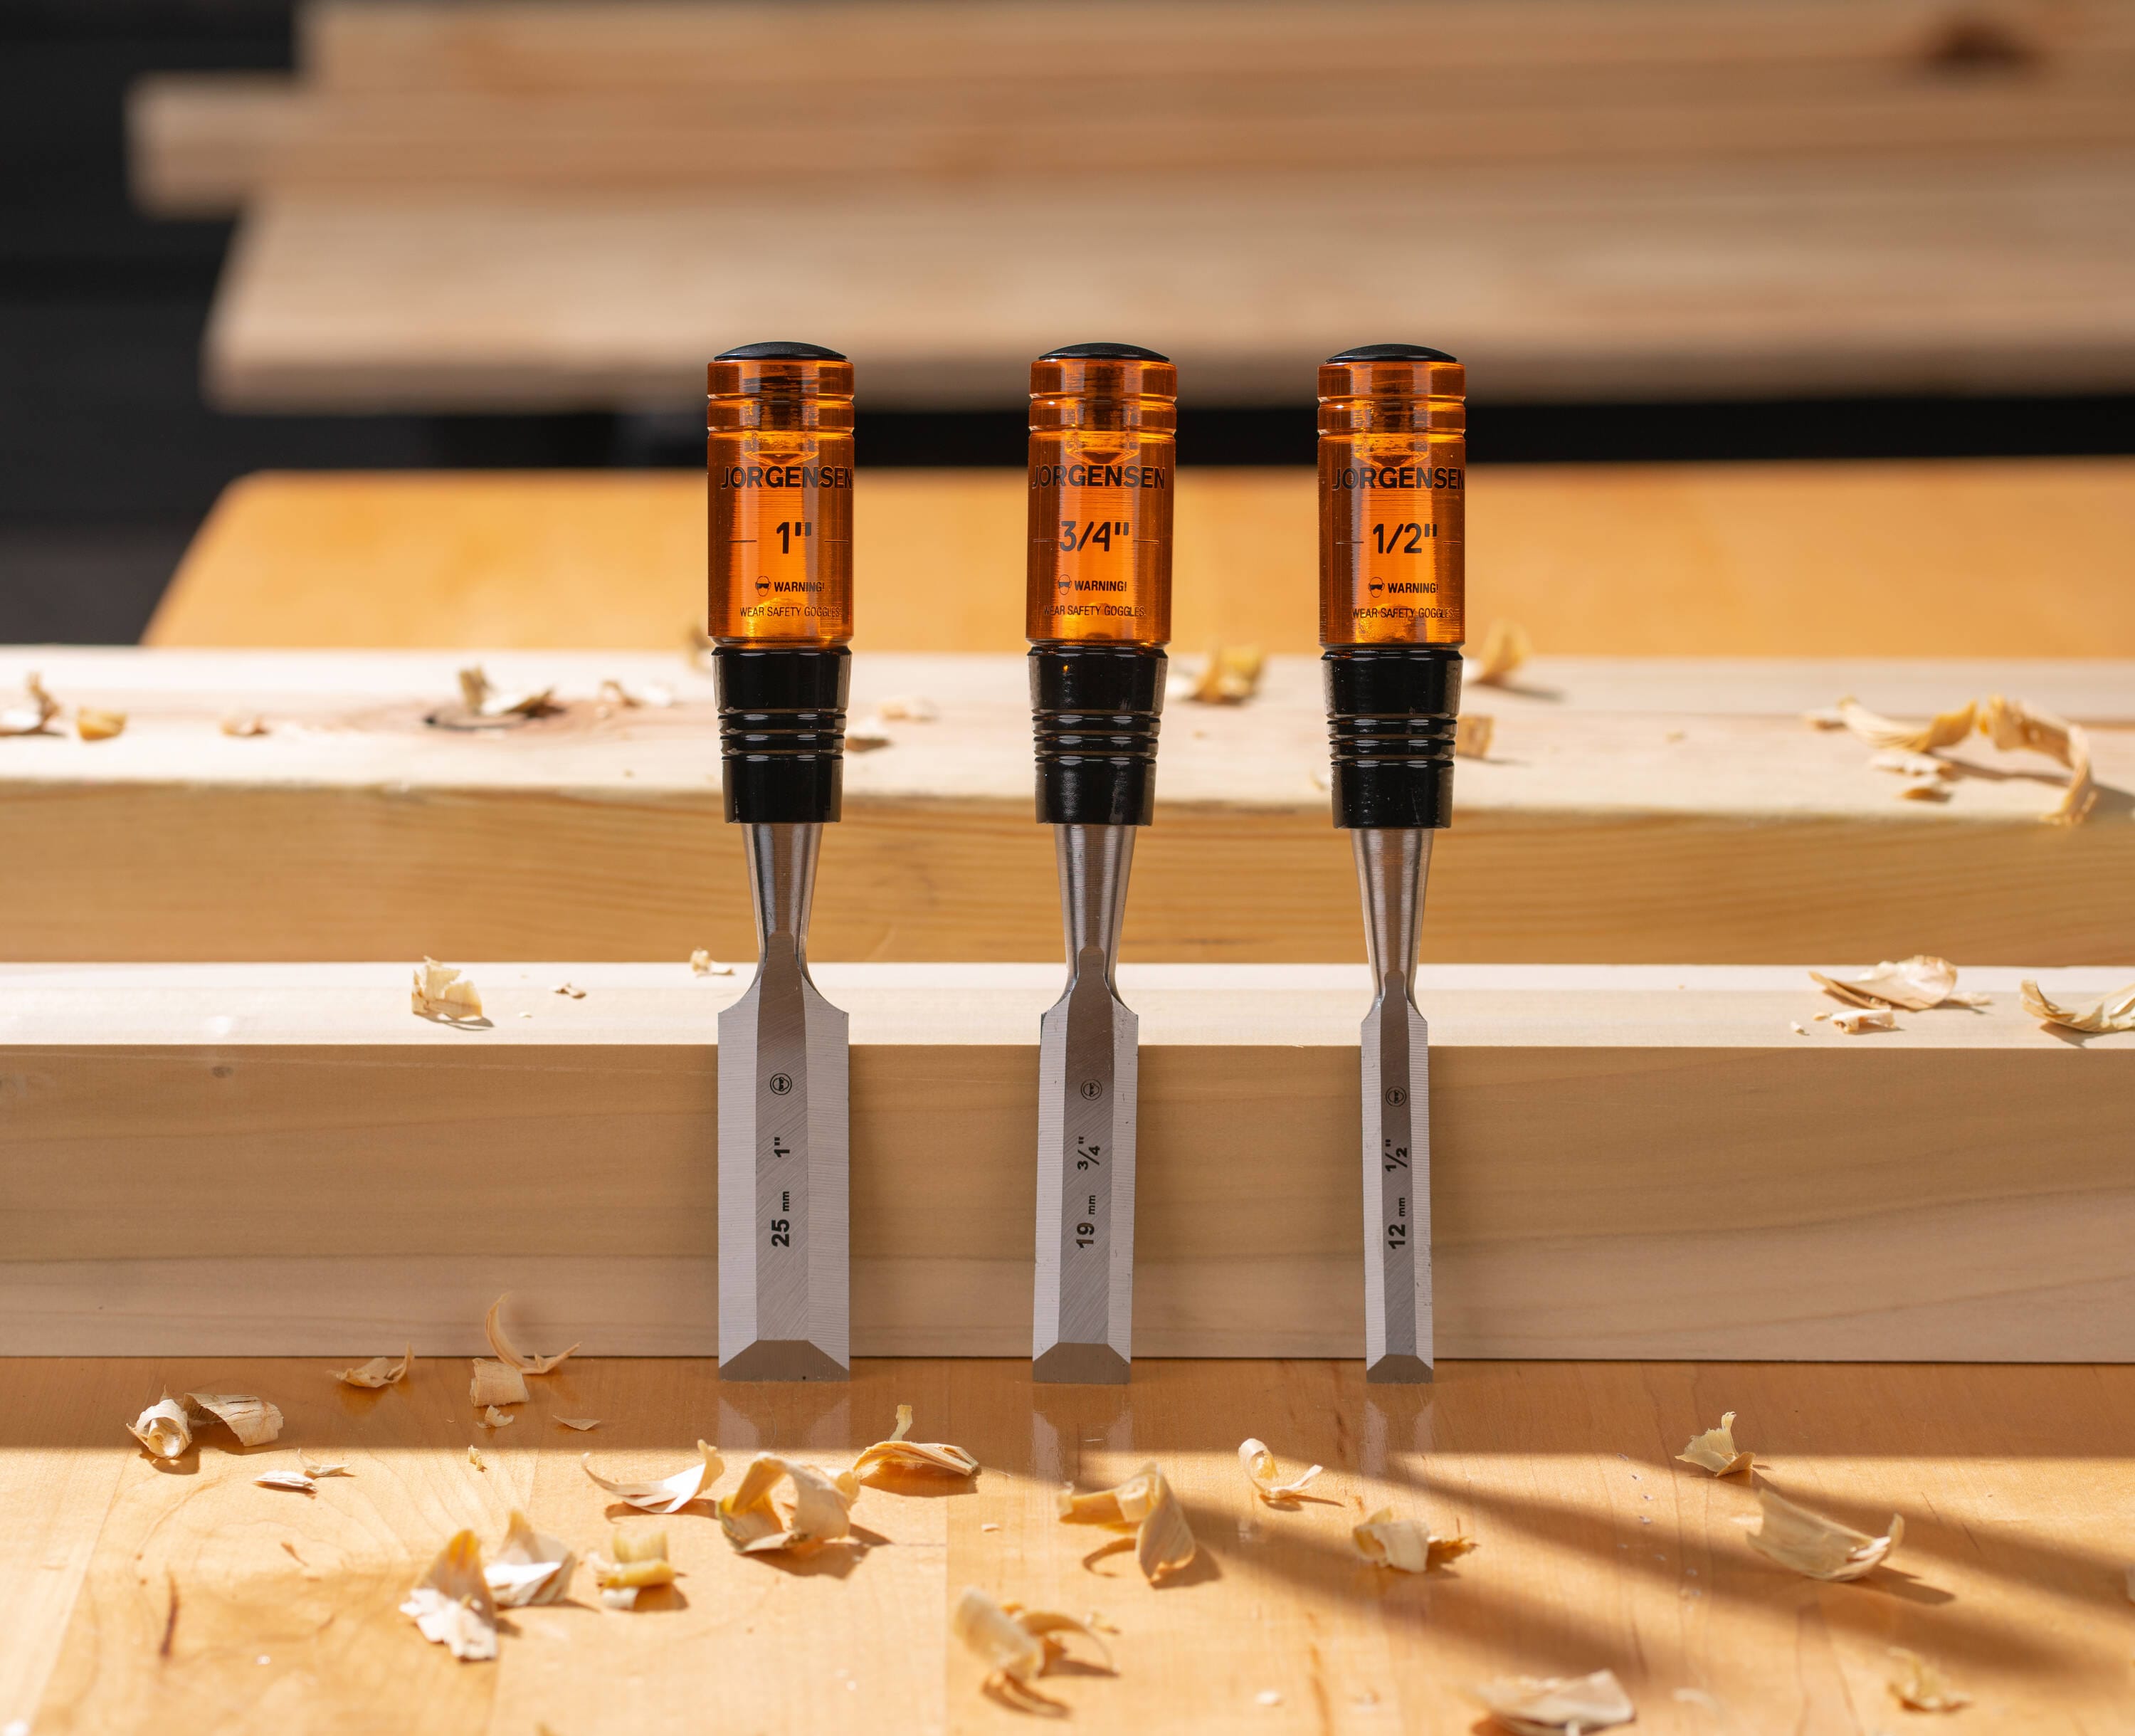 Irwin 3 Pc. Woodworking Chisel Set 1769179 from Irwin - Acme Tools